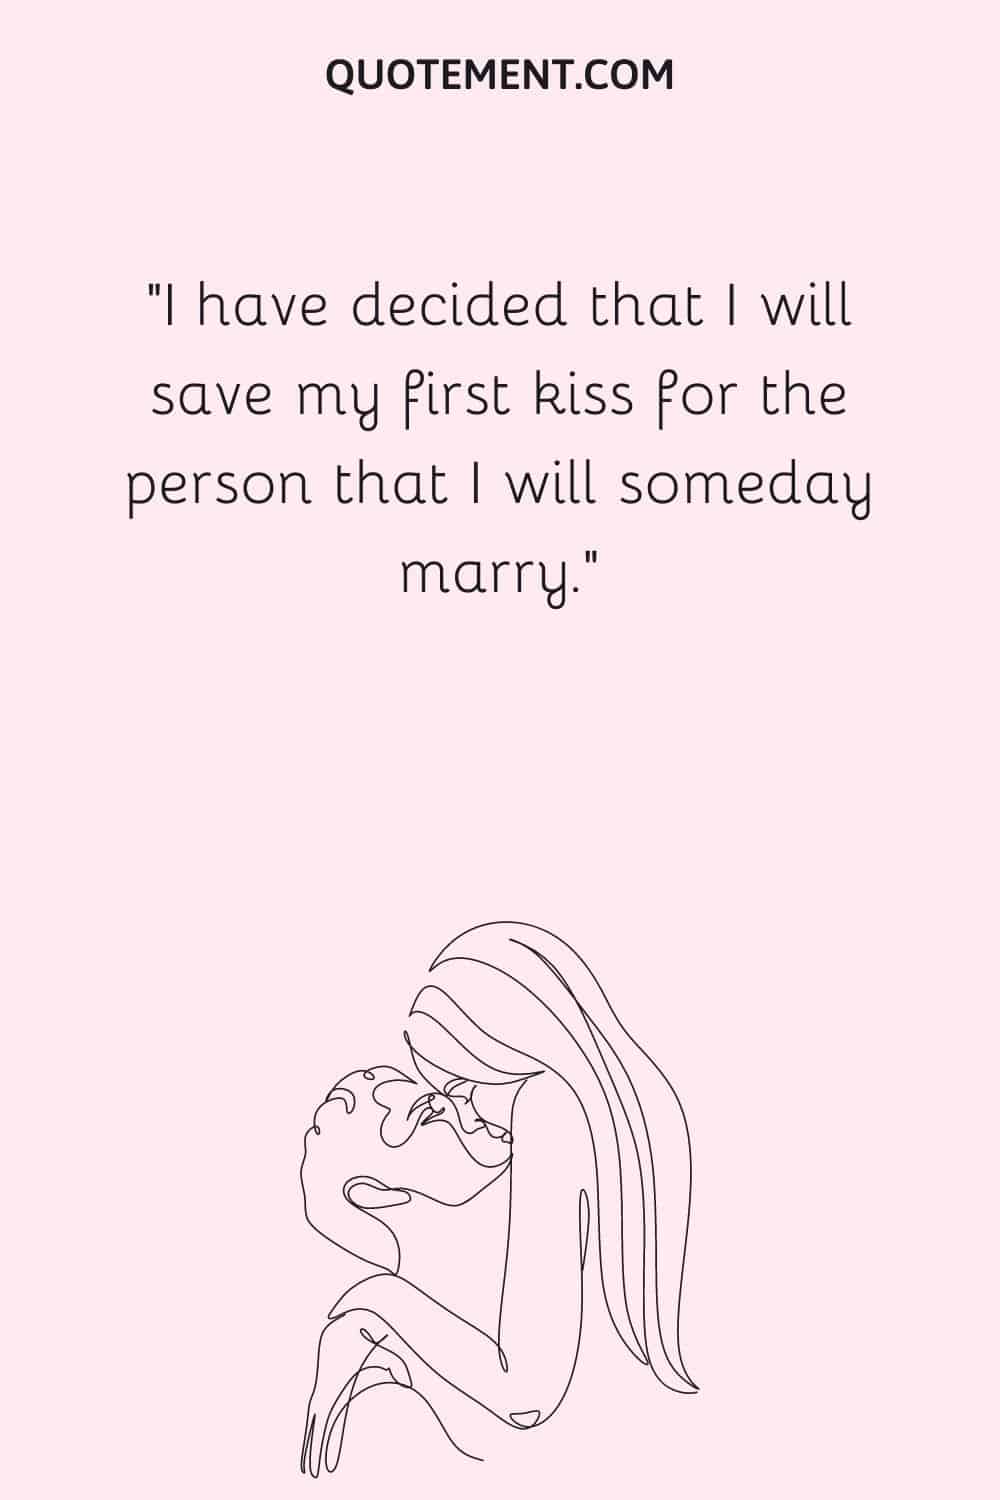 I have decided that I will save my first kiss for the person that I will someday marry.